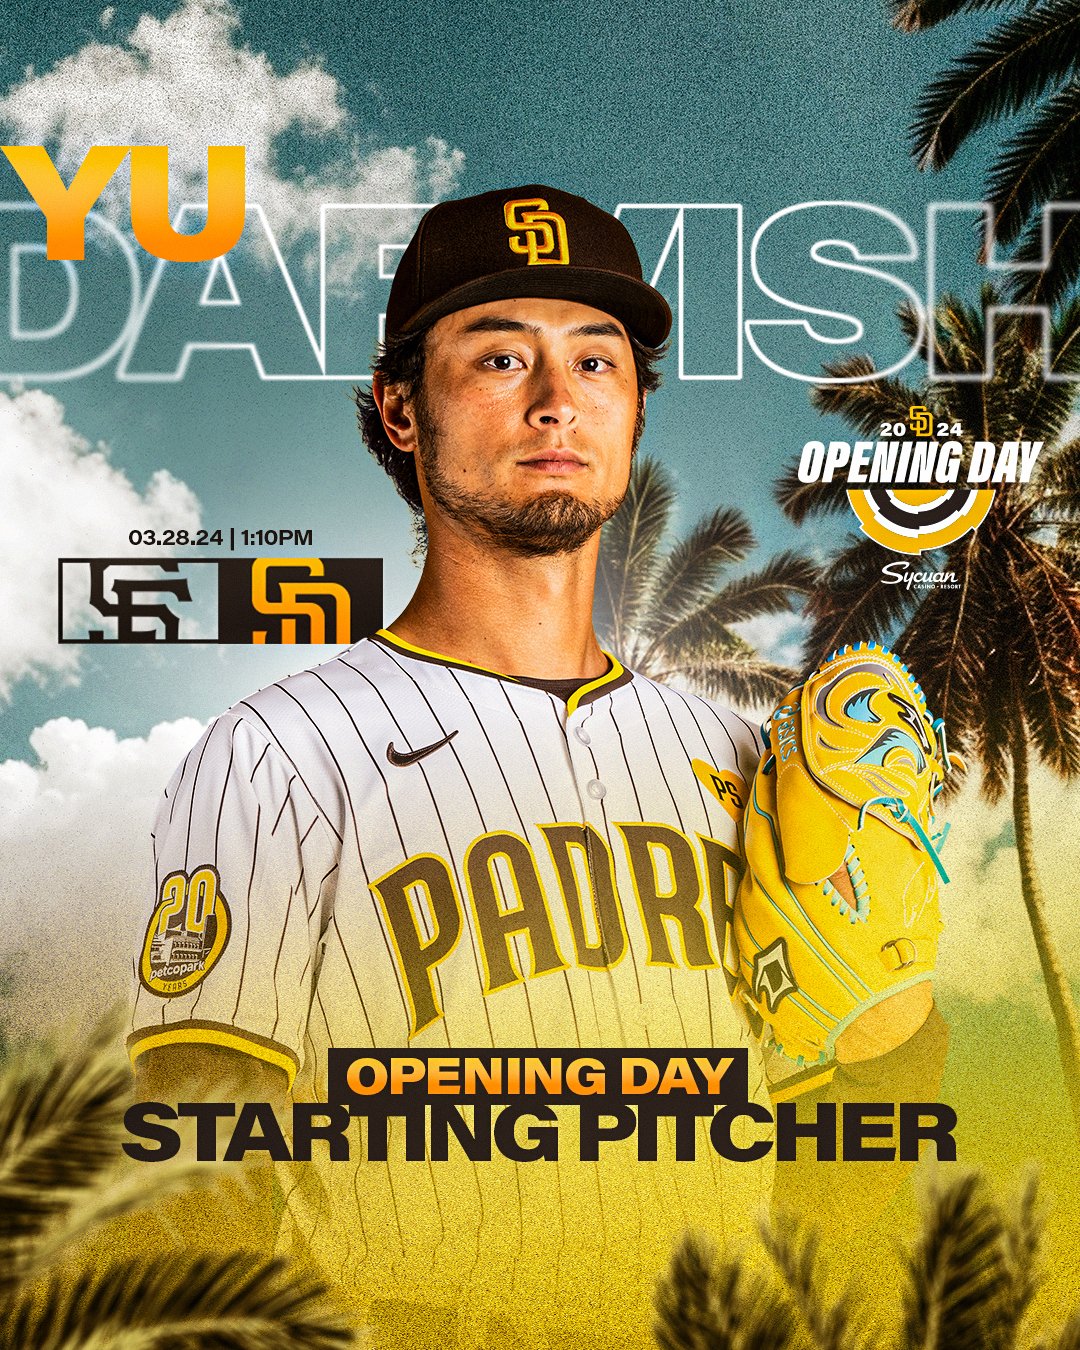 Graphic for the SD Opening Day Starting Pitcher. The background is a photo of a blue sky and palm tress. In the center of the graphic is a cutout photo of Yu Darvish. He is holding his glove up to his chest and is wearing the Padres home white pinstripes uniform. Large gold and white text at the top of the graphic, behind Yu’s head, reads “Yu Darvish”. Under that on the right side of the text is the SD 2024 Opening Day presented by Sycuan logo. On the left side of the graphic, above Yu’s shoulder, is the date, time and matchup: 3.28.24, 1:10 PM, Giants vs Padres. Brown and gold text at the bottom of the graphic reads “Opening Day Starting Pitcher”.